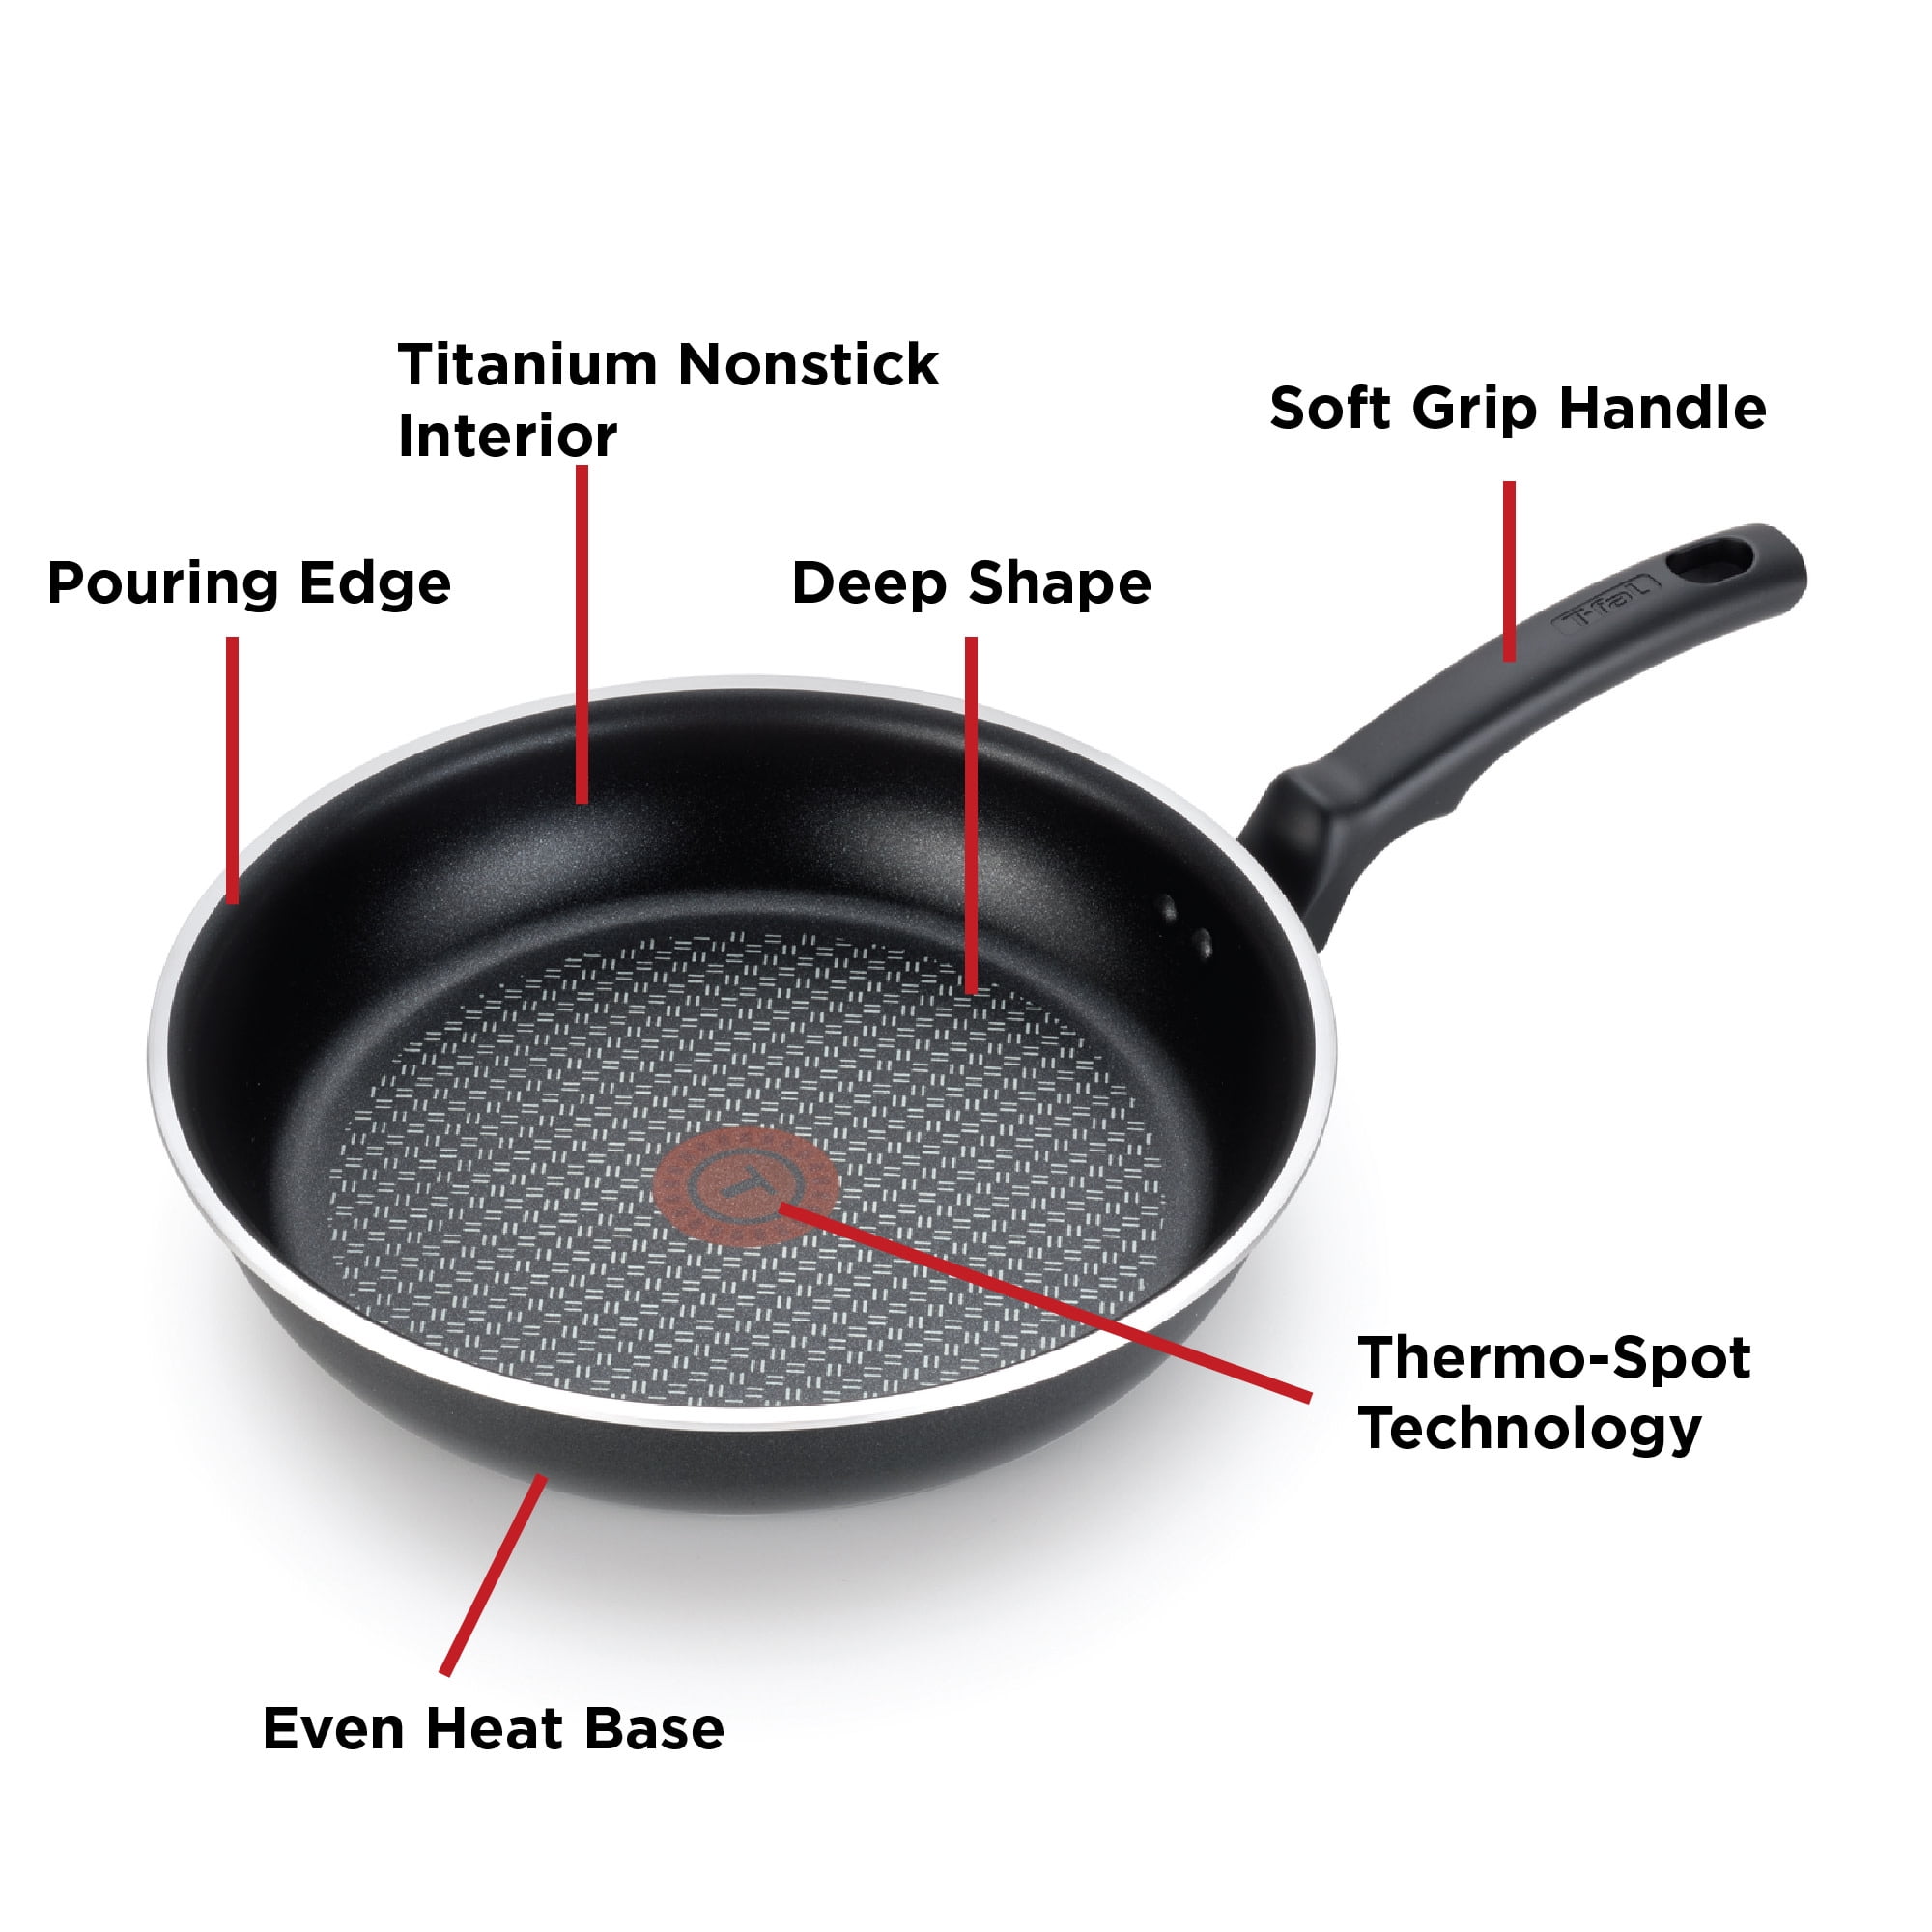 T-fal Professional Nonstick 12-Inch Fry Pan 